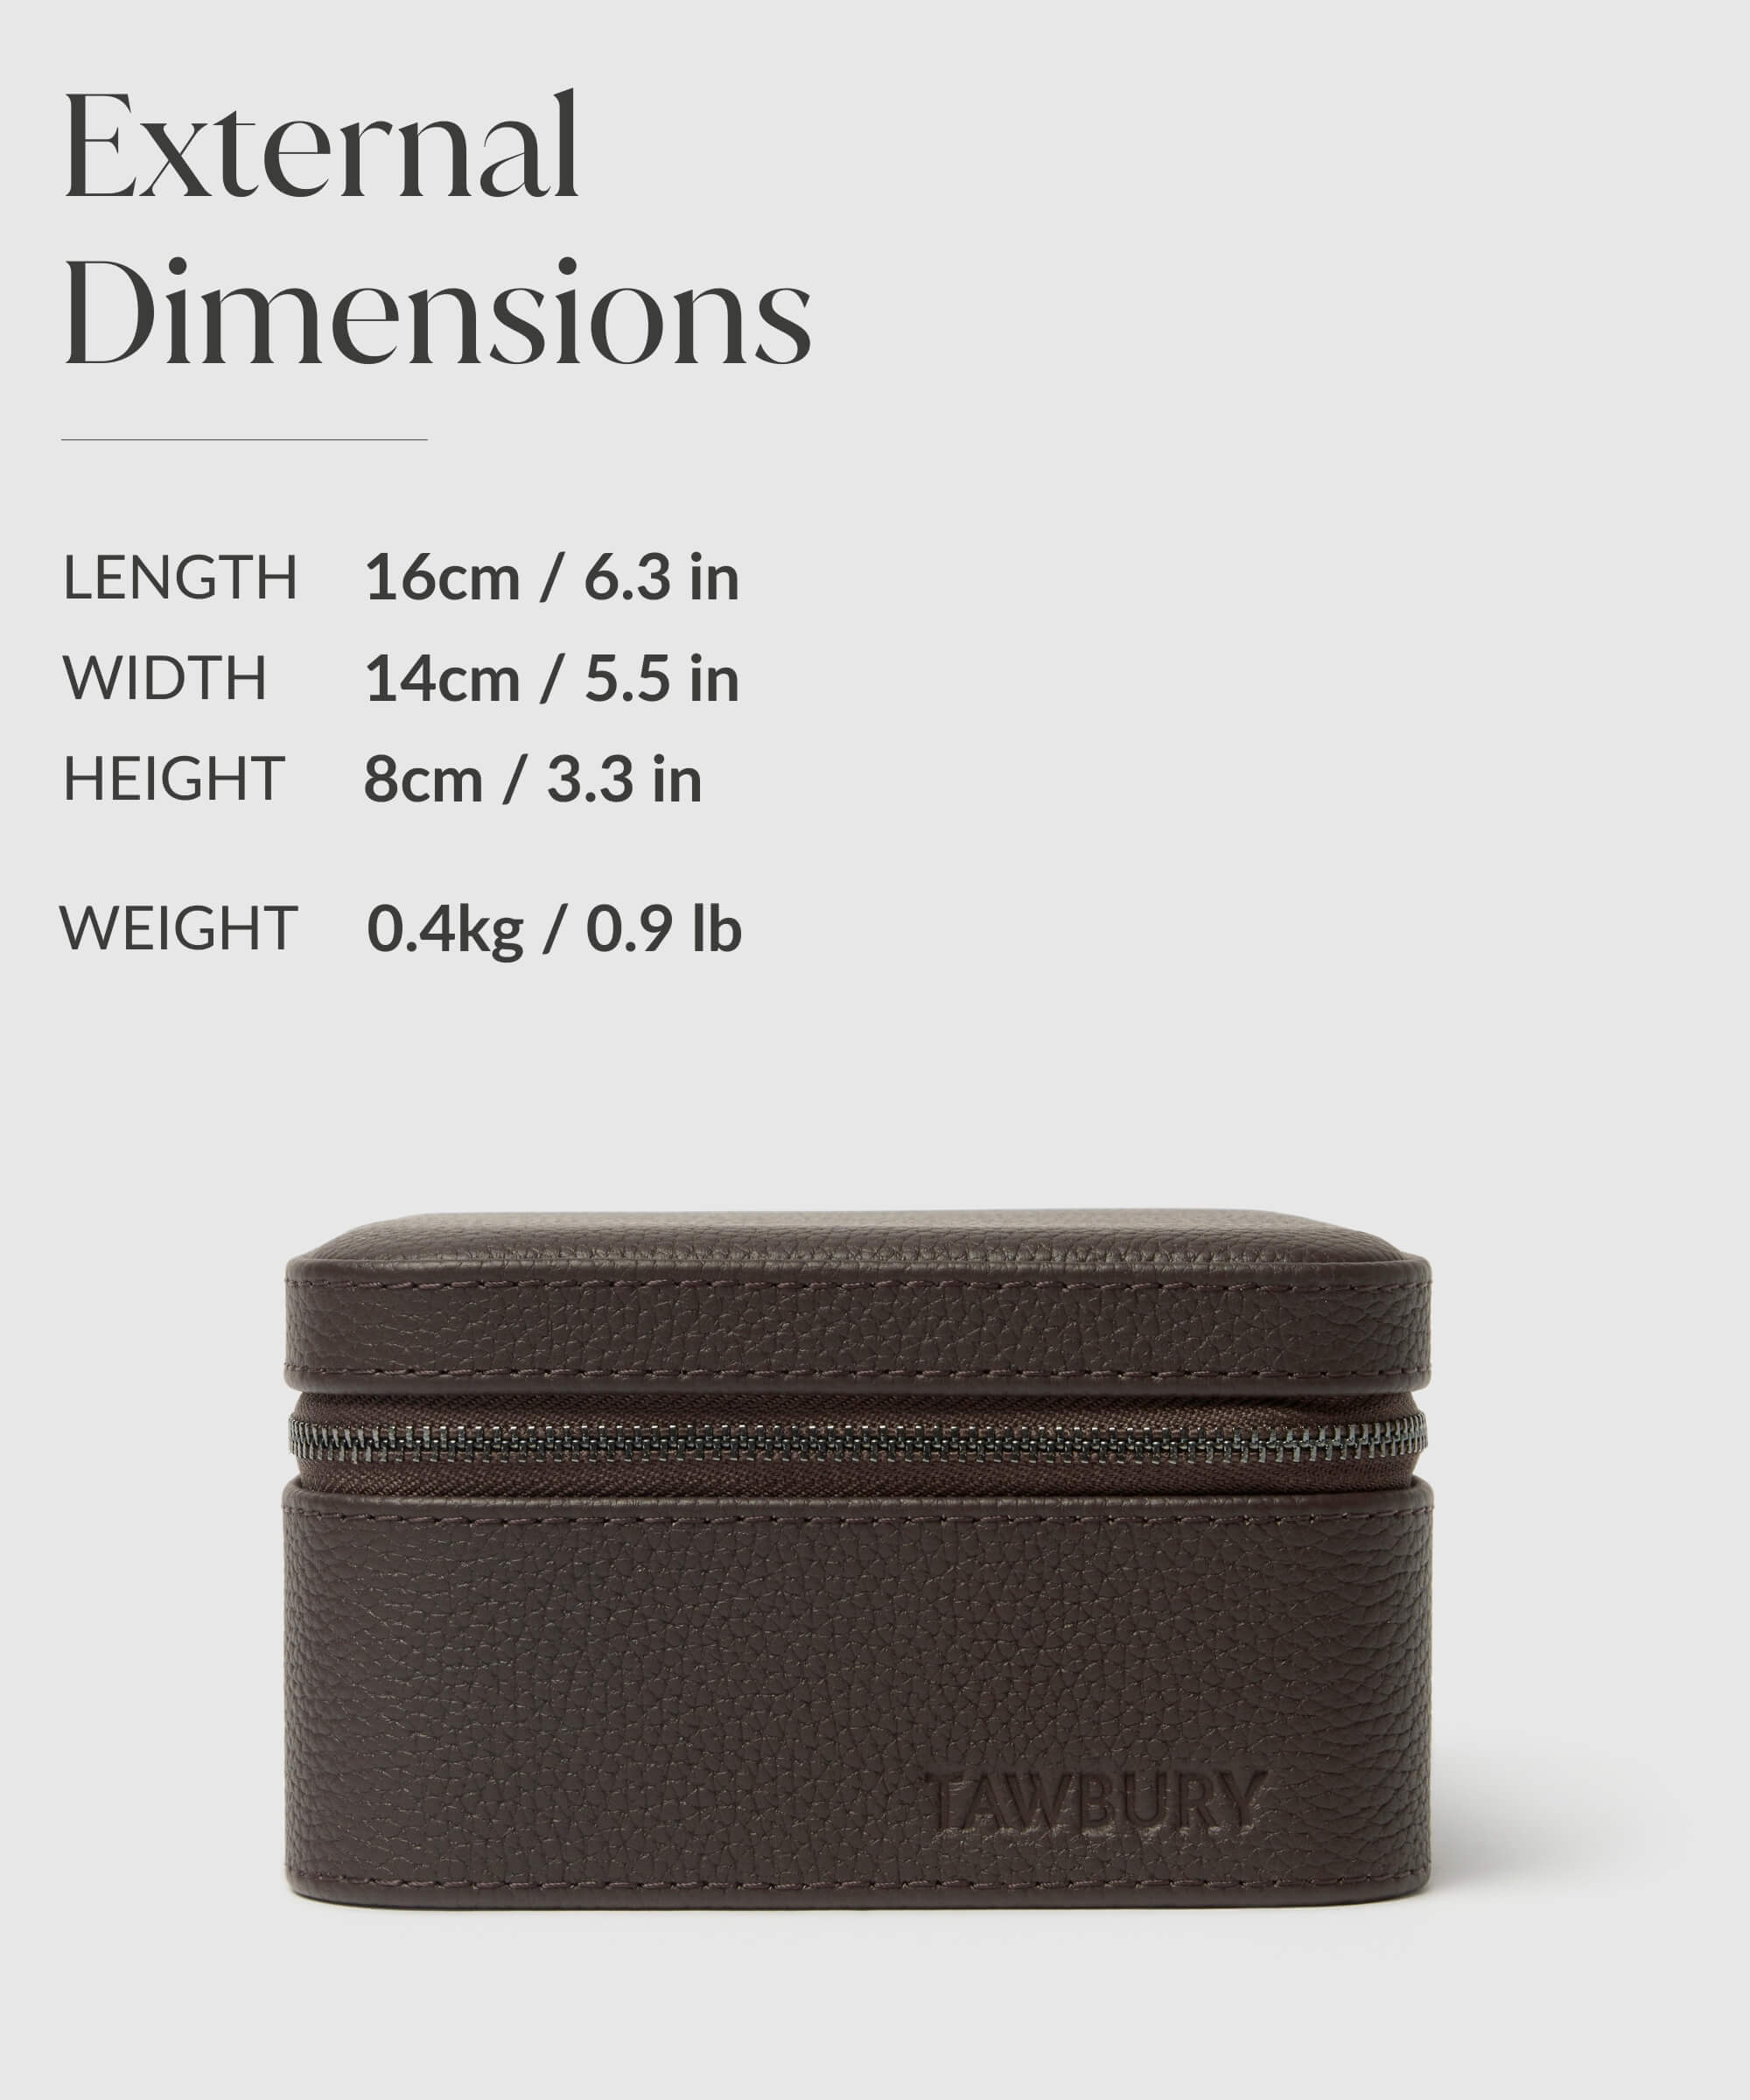 The compact design of a TAWBURY Fraser 2 Watch Travel Case with Storage - Brown offers protection for watches and serves as a watch travel case.